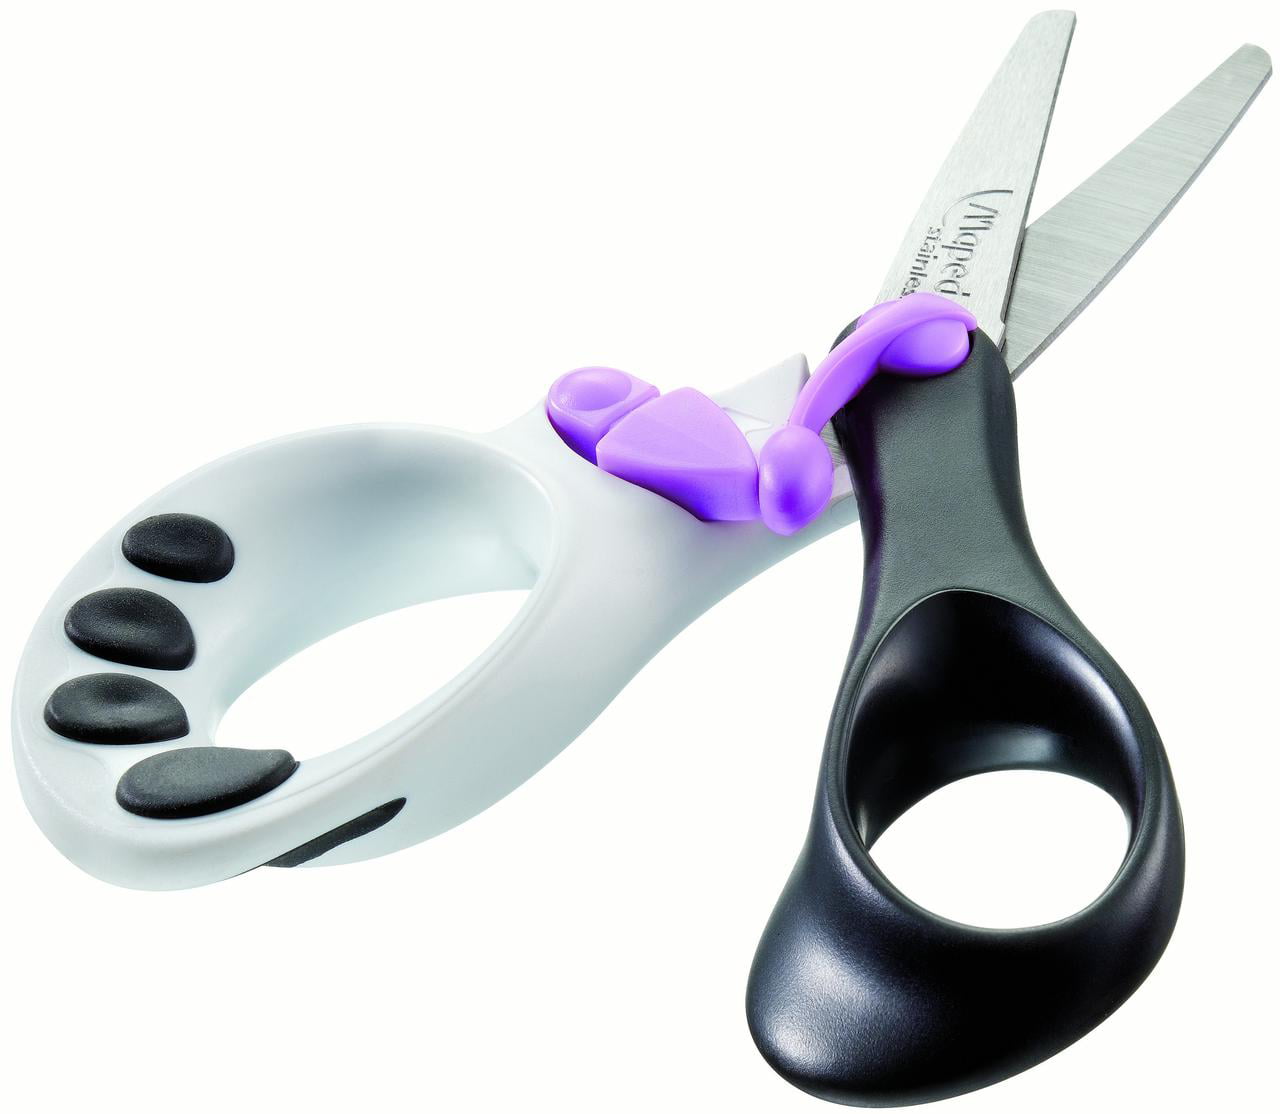 Maped Spring Assisted Scissors - Set of 24 by Maped